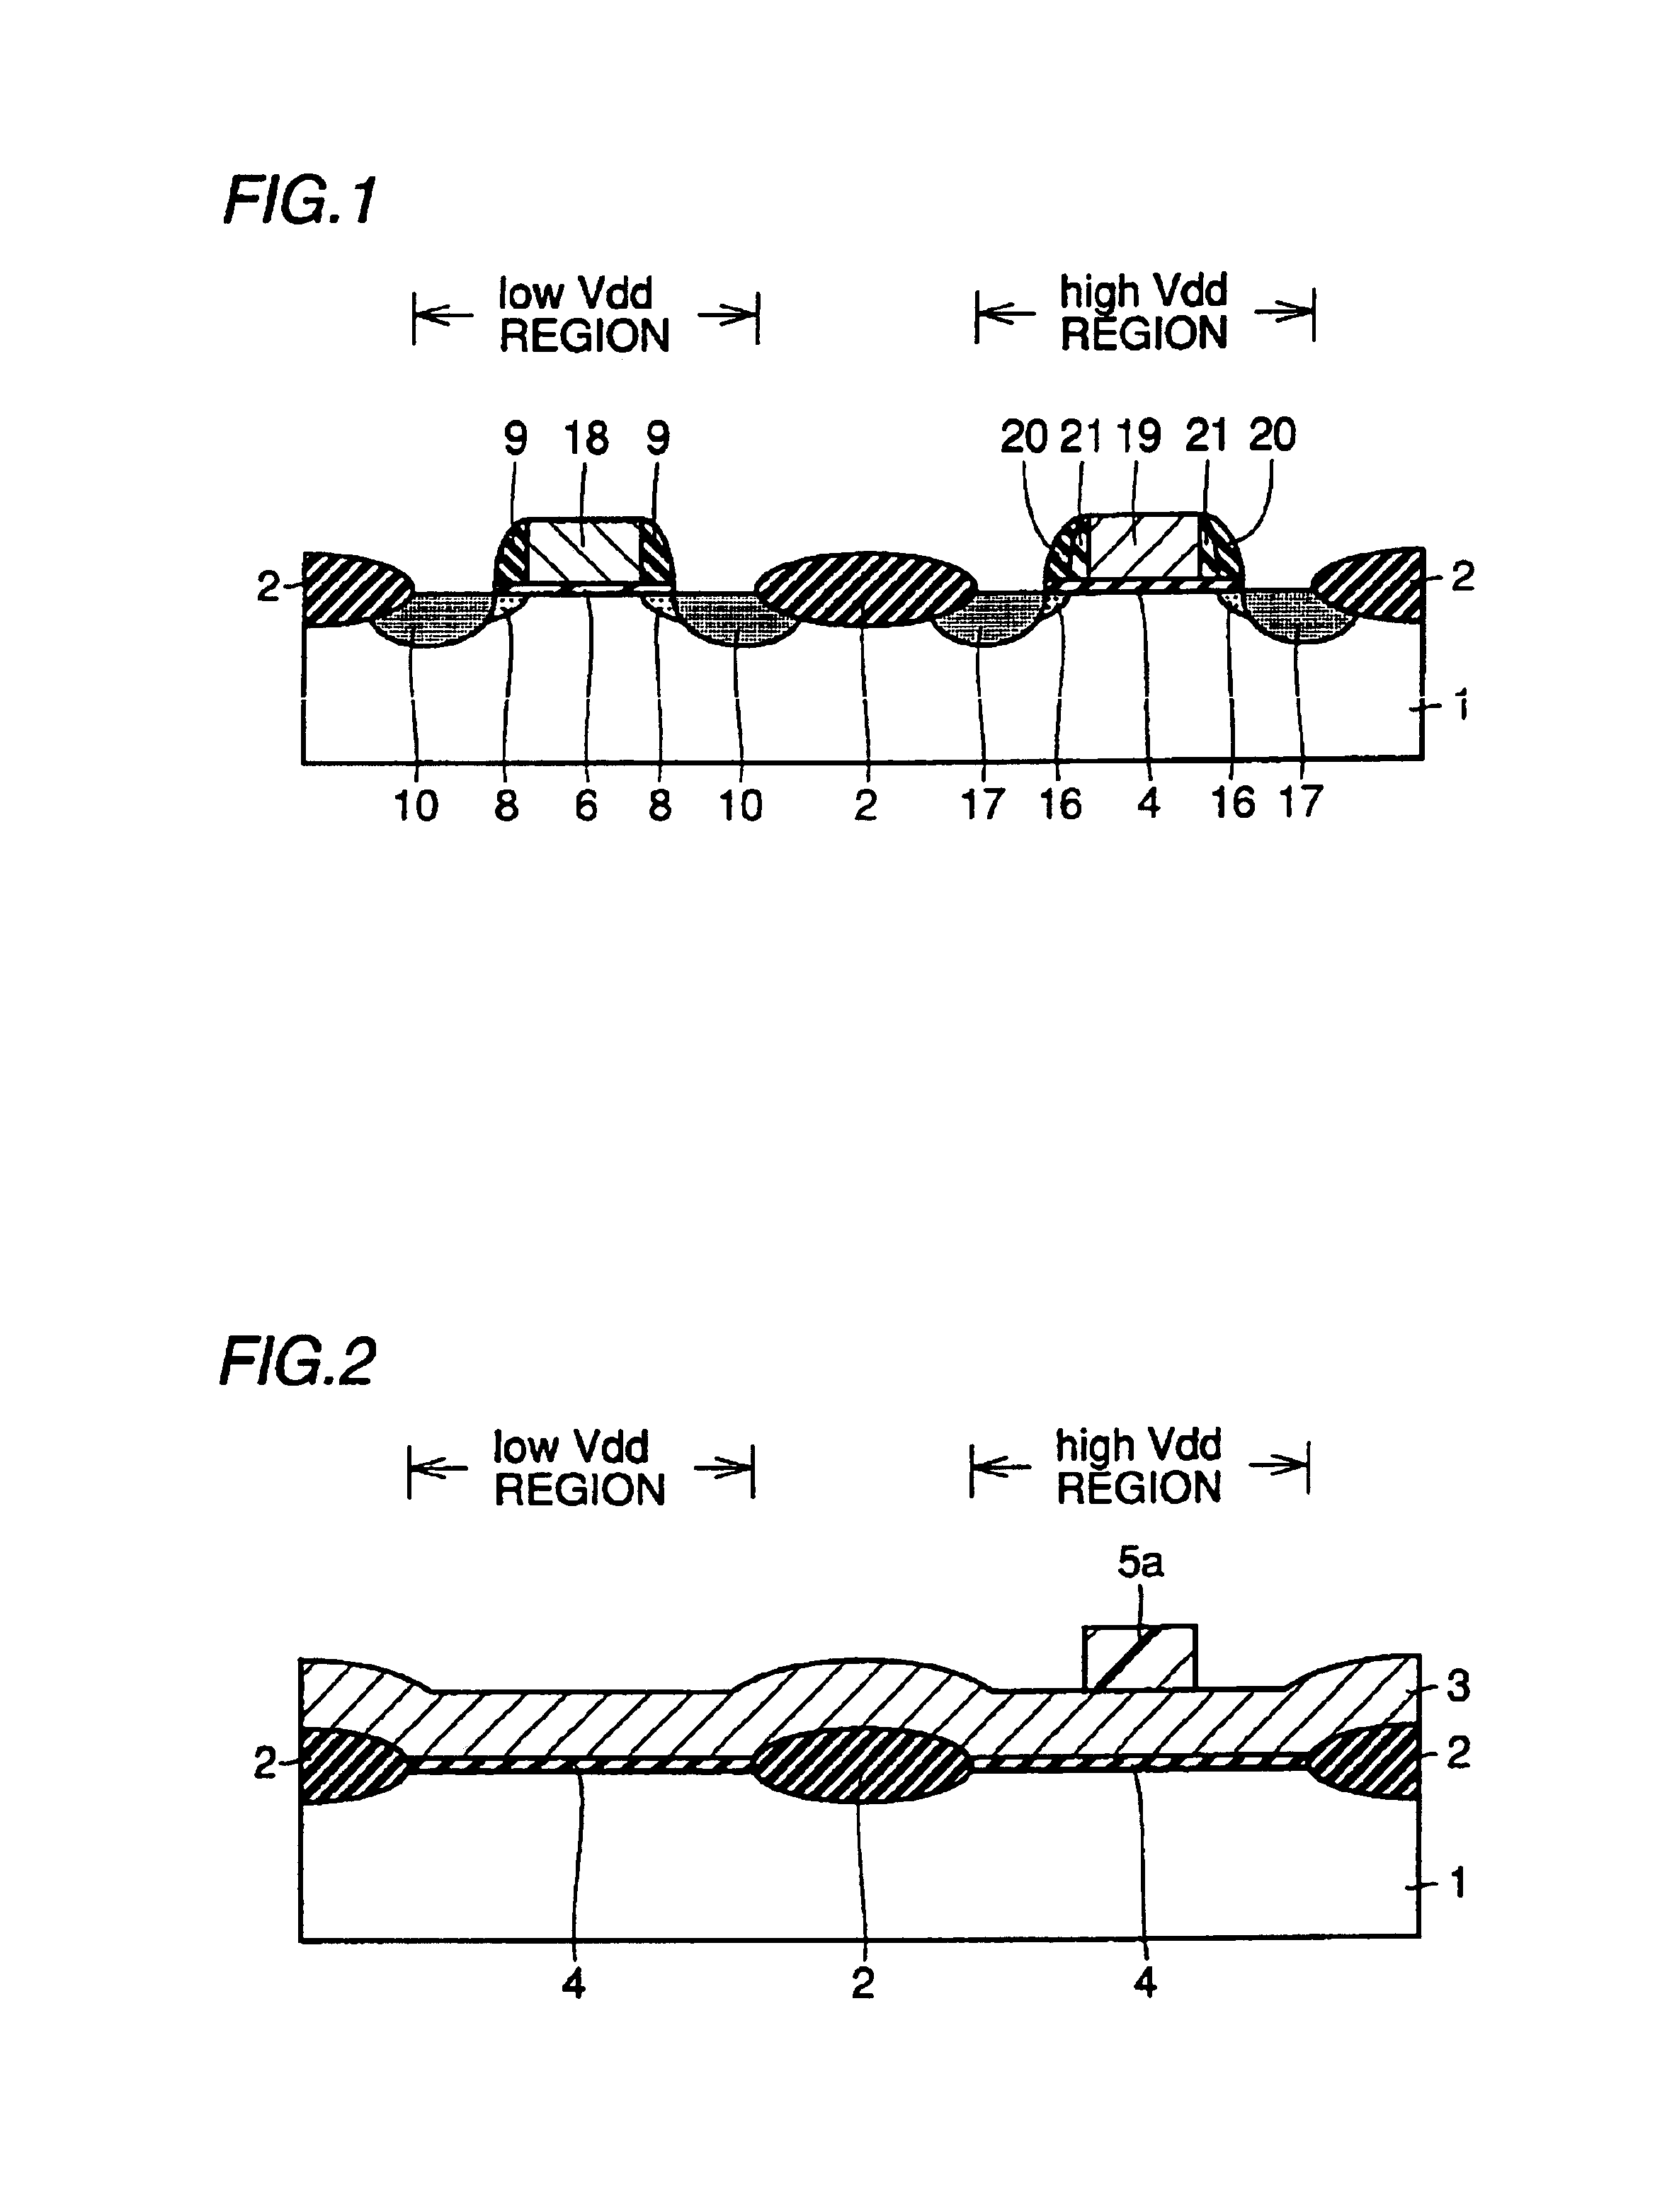 Semiconductor device including multiple field effect transistors, with first FETs having oxide spacers and the second FETs having oxide nitride oxidation protection